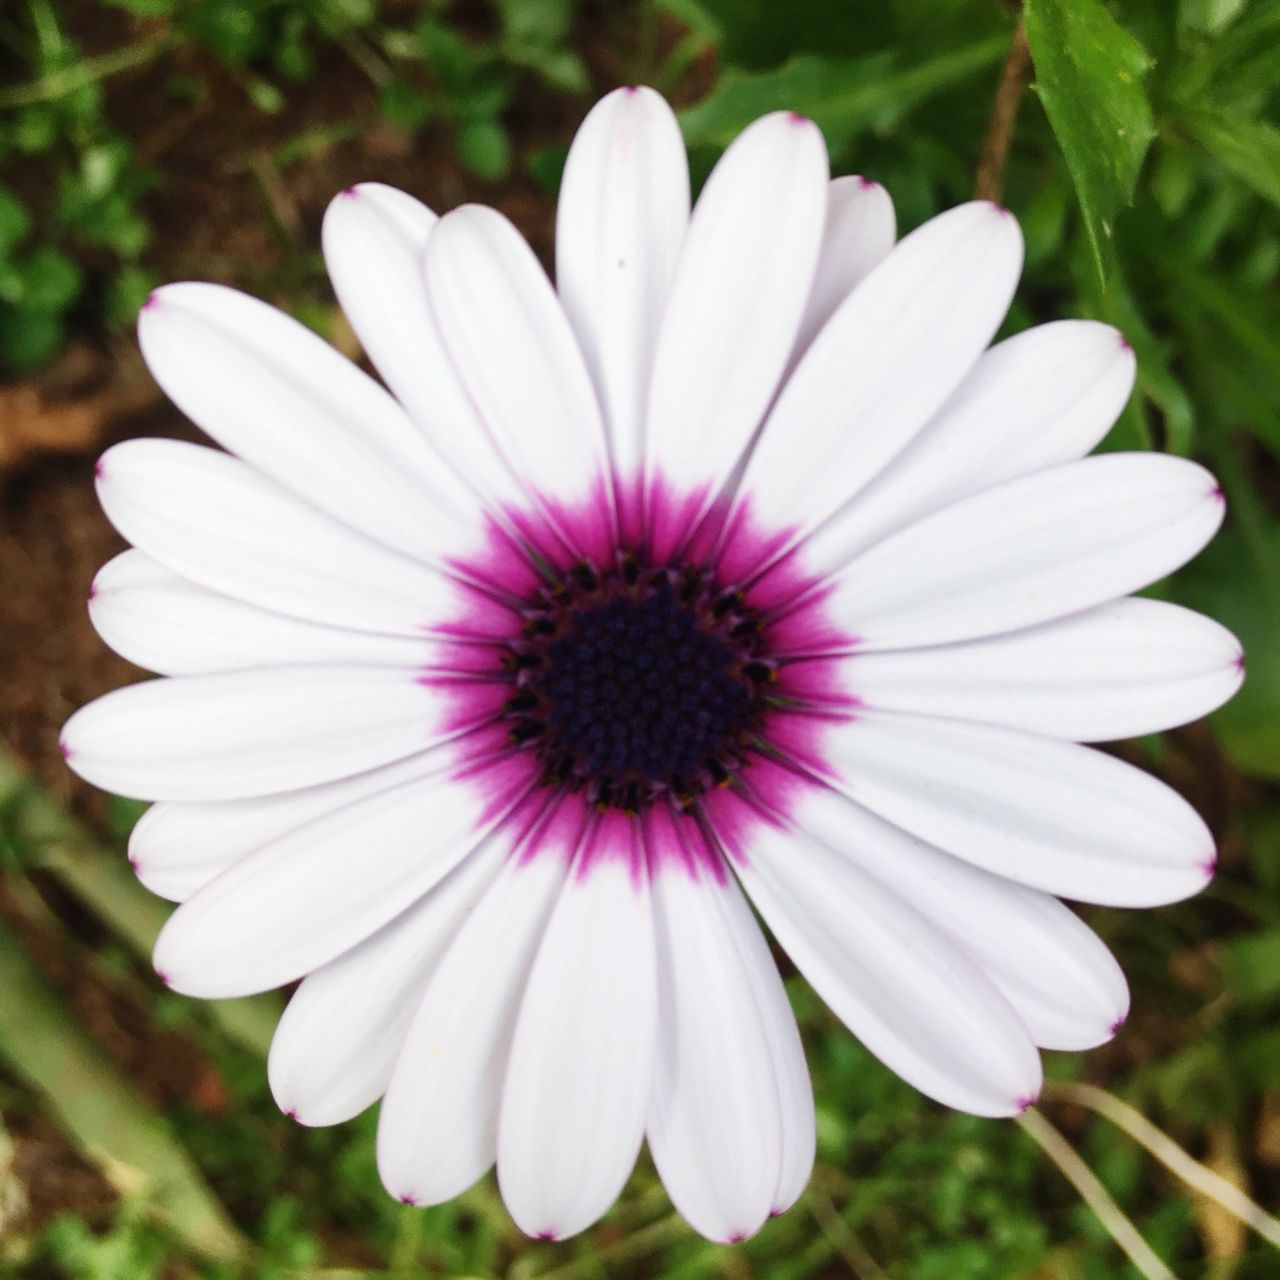 flower, fragility, freshness, nature, beauty in nature, petal, flower head, growth, blooming, plant, close-up, no people, pollen, outdoors, day, osteospermum